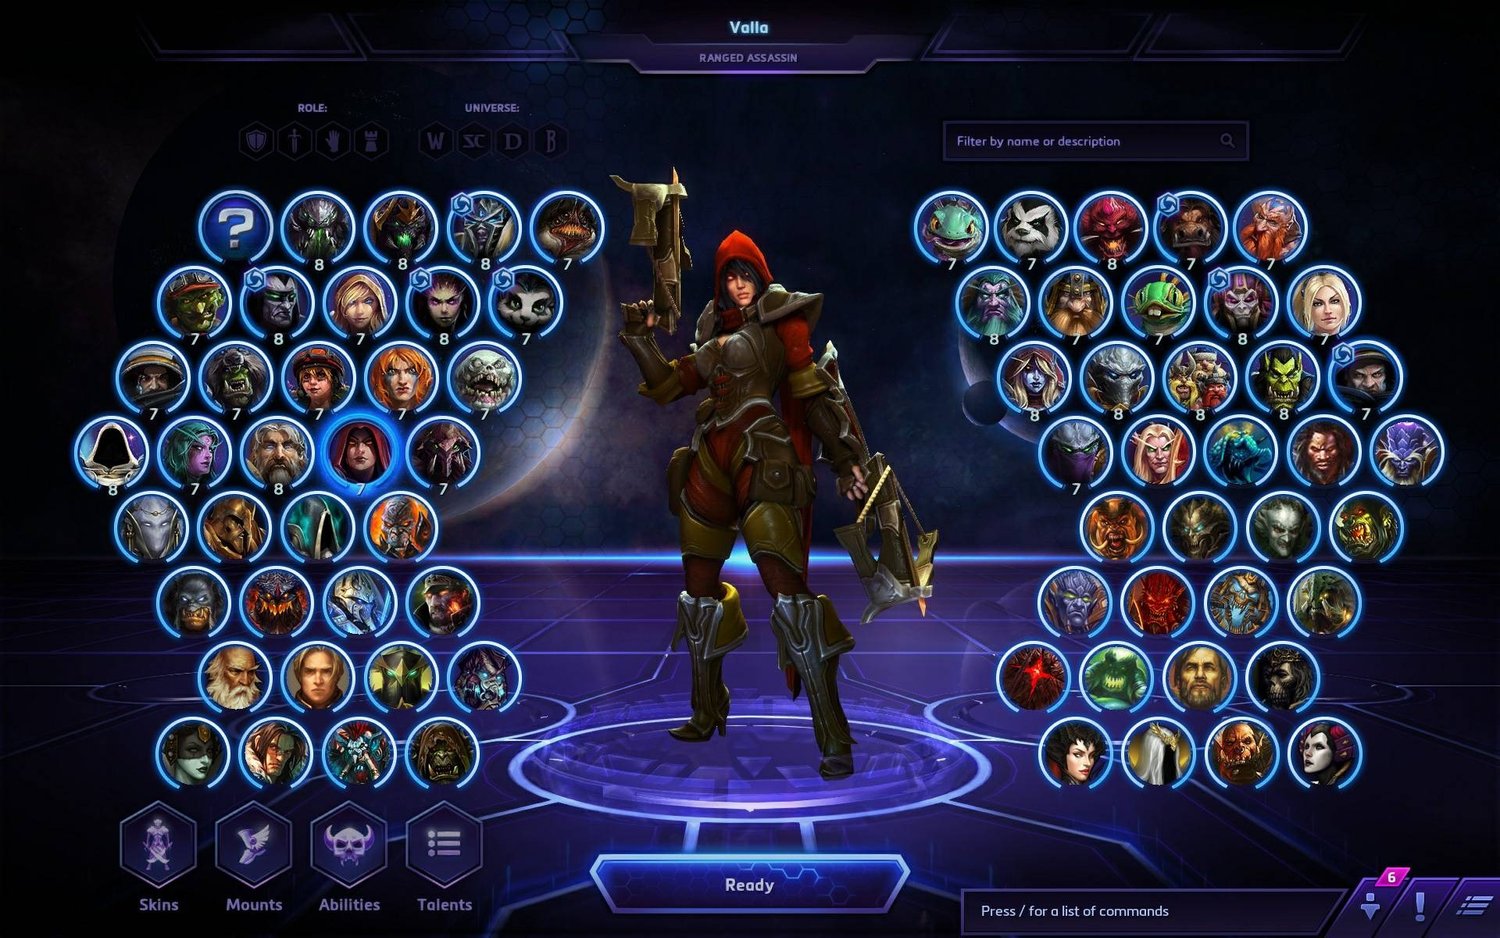 Heroes of the Storm Review - Fun, For a Little While